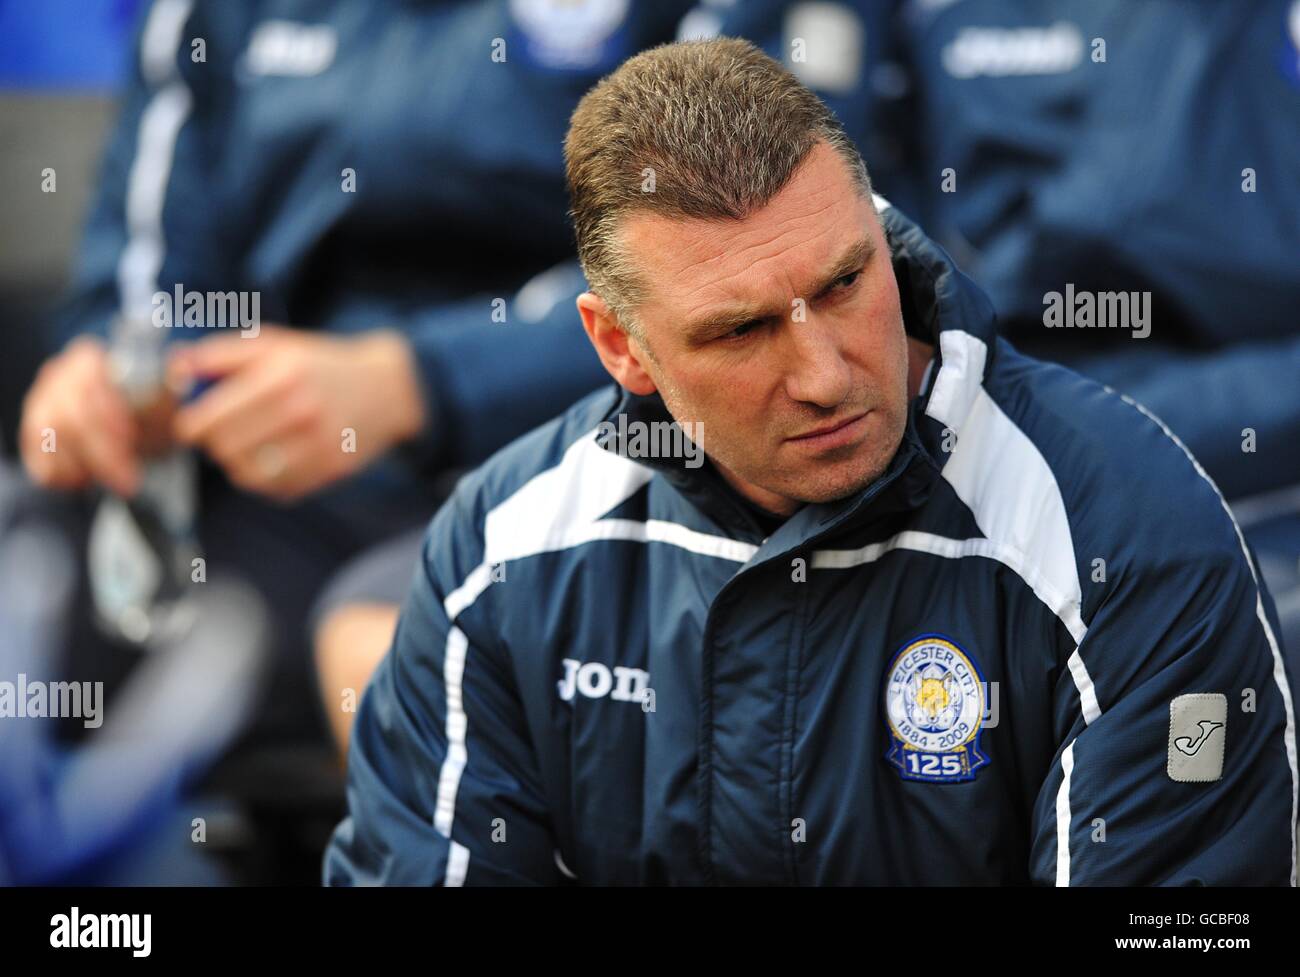 Soccer - Coca-Cola Football League Championship - Leicester City v Nottingham Forest - The Walkers Stadium. Nigel Pearson, Leicester City manager Stock Photo